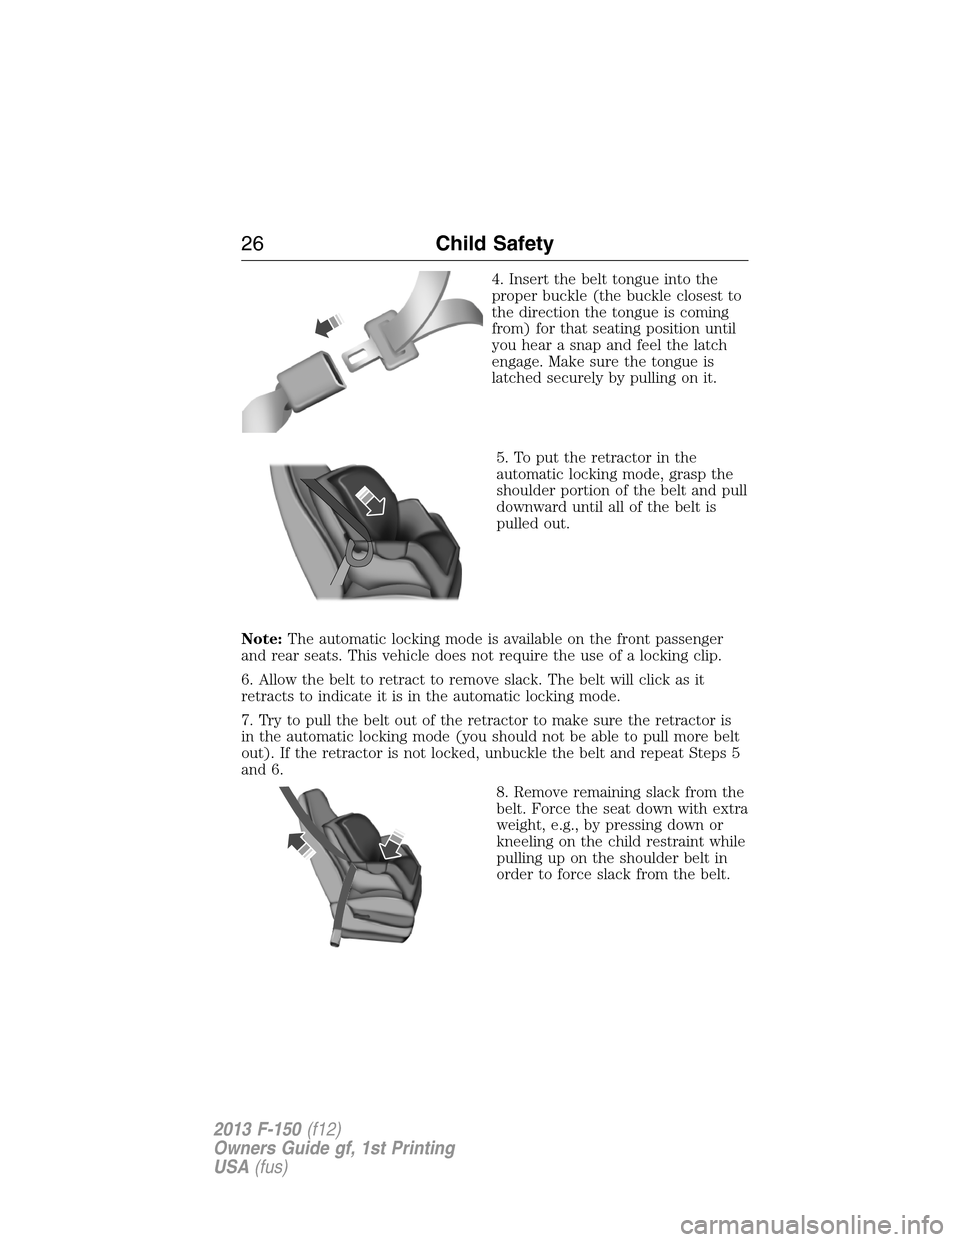 FORD F150 2013 12.G Owners Manual 4. Insert the belt tongue into the
proper buckle (the buckle closest to
the direction the tongue is coming
from) for that seating position until
you hear a snap and feel the latch
engage. Make sure th